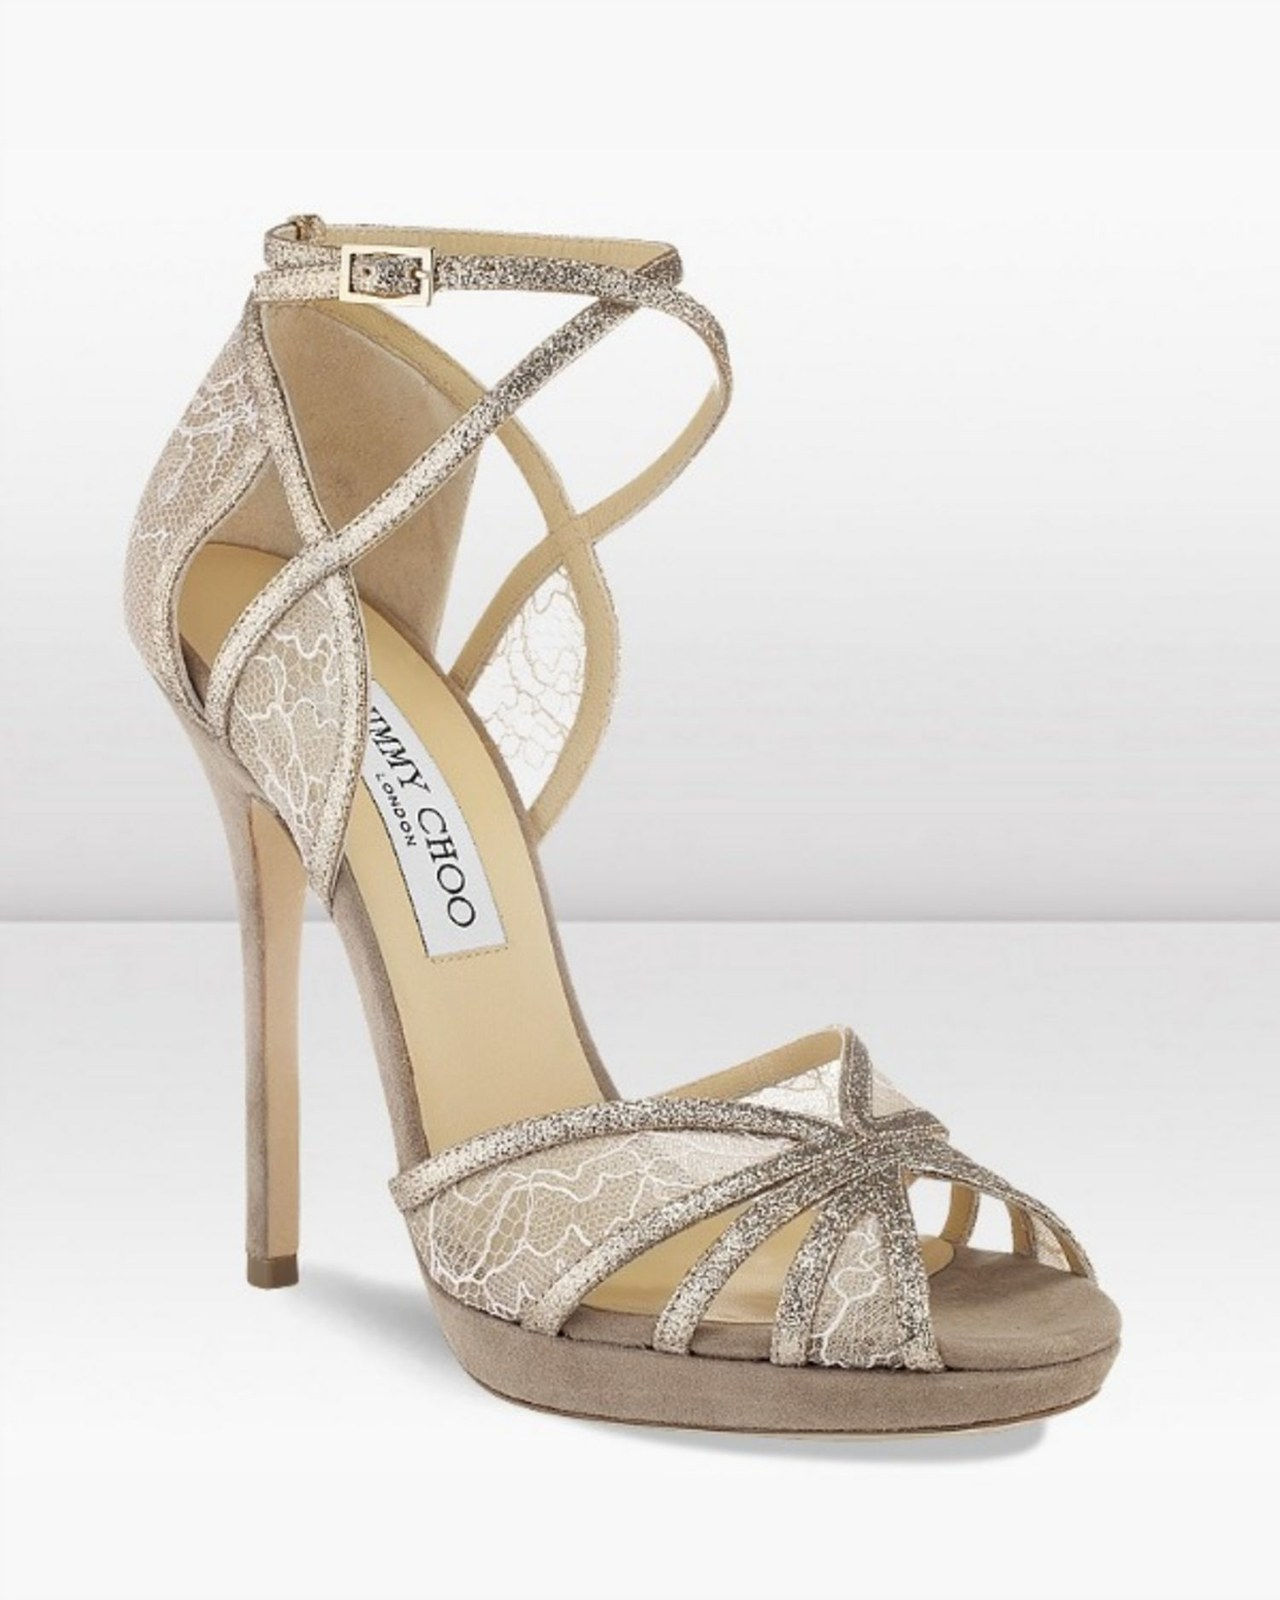 4 jimmy choo wedding shoes for brides 0304